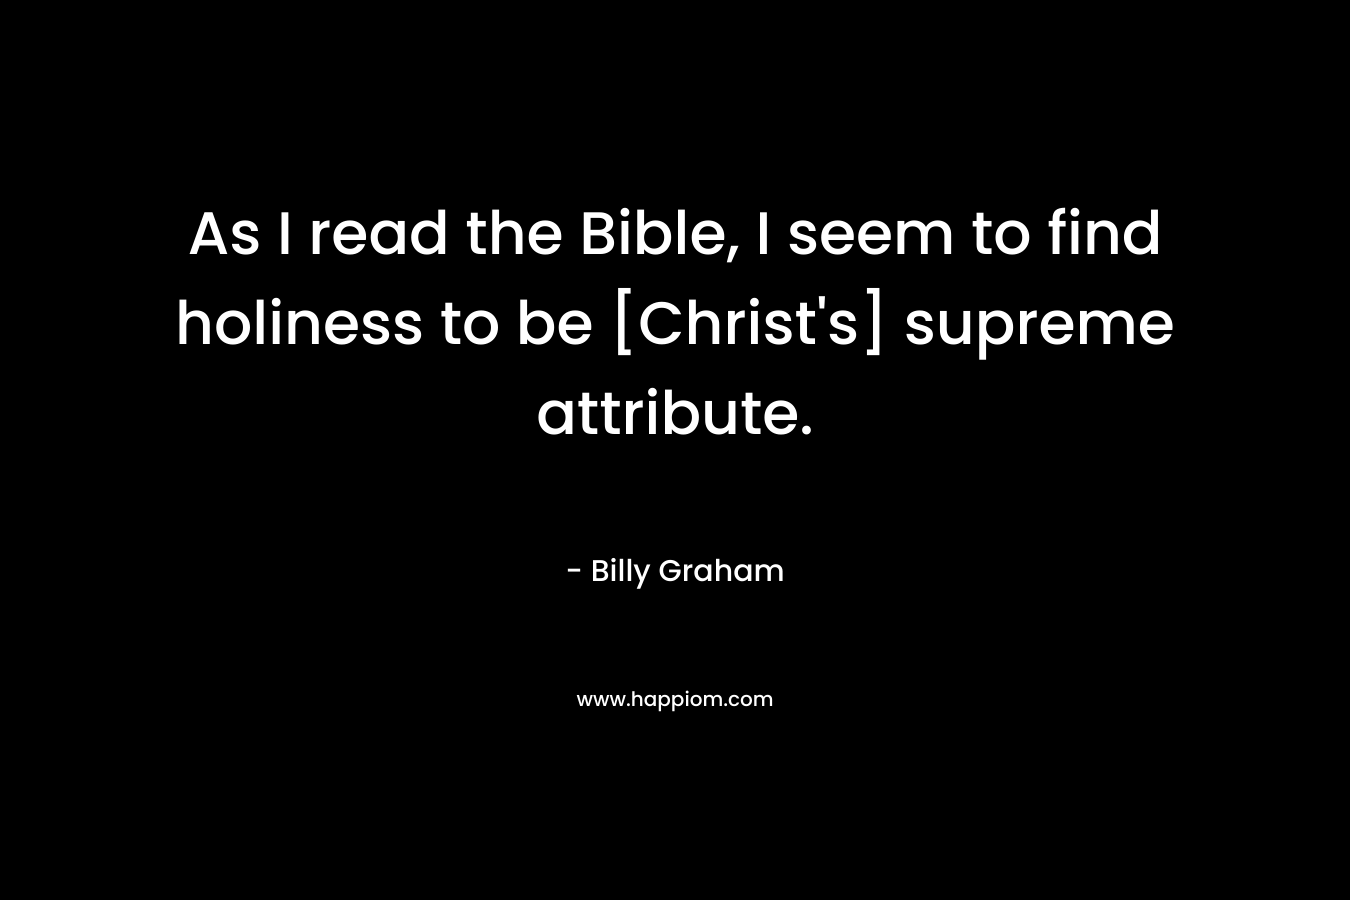 As I read the Bible, I seem to find holiness to be [Christ's] supreme attribute.